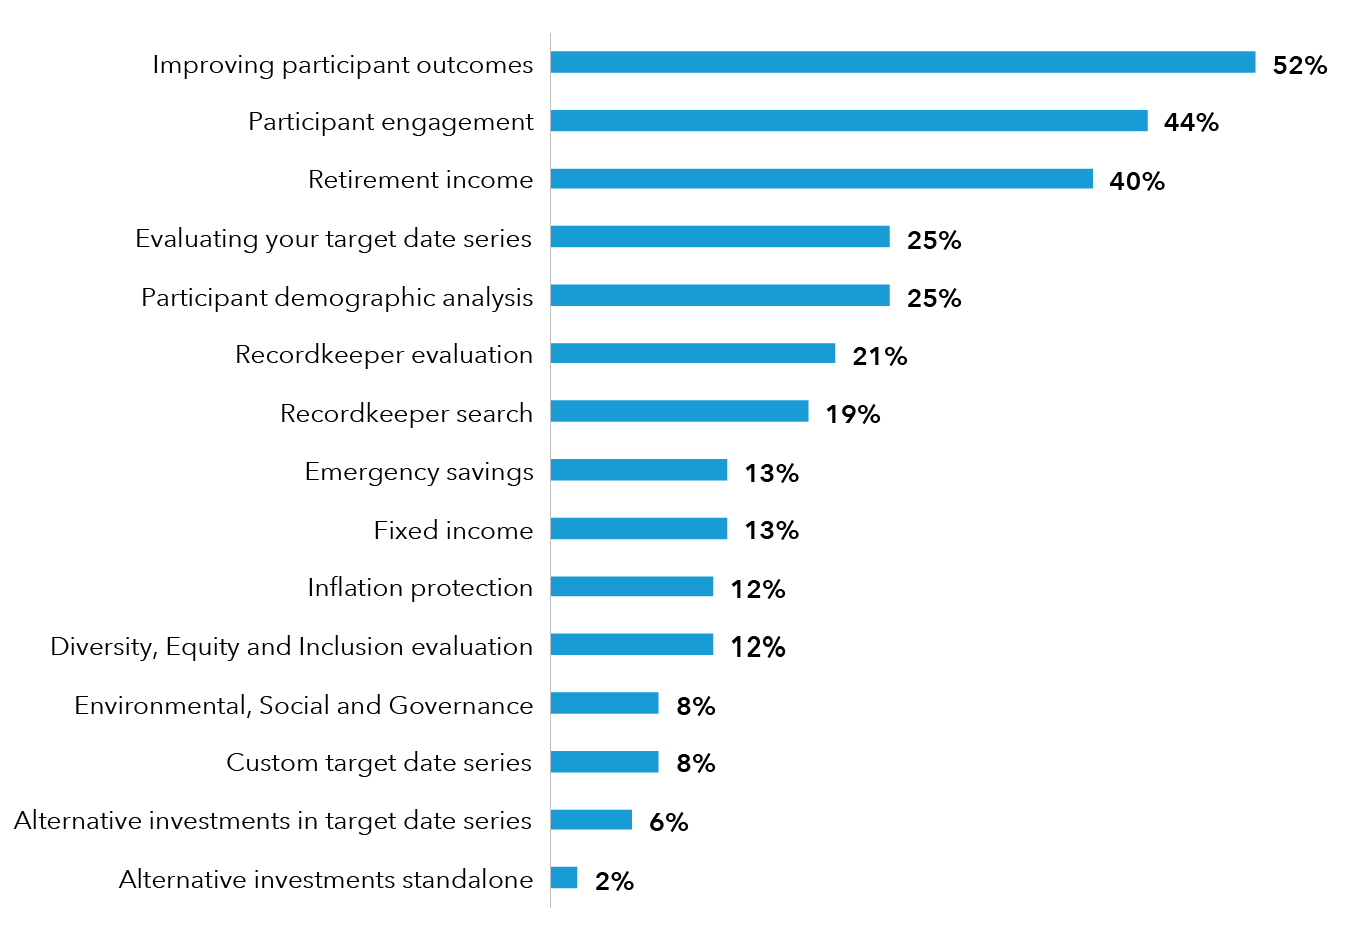 The chart displays defined contribution plan sponsors’ top three priorities for their plan in the next 12 months. The top priority was improving participant outcomes, cited by 52% of the respondents. The other priorities and percentages of respondents who cited them were: participant engagement, 44%; retirement income, 40%; evaluating your target-date series, 25%; participant demographic analysis, 25%; recordkeeper evaluation, 21%; recordkeeper search, 19%; emergency savings, 13%; fixed income, 13%; inflation protection, 12%; diversity, equity and inclusion evaluation, 12%; environmental, social and governance, 8%; custom target-date series, 8%; alternative investments in target-date series, 6%; alternative investment standalone, 2%. 